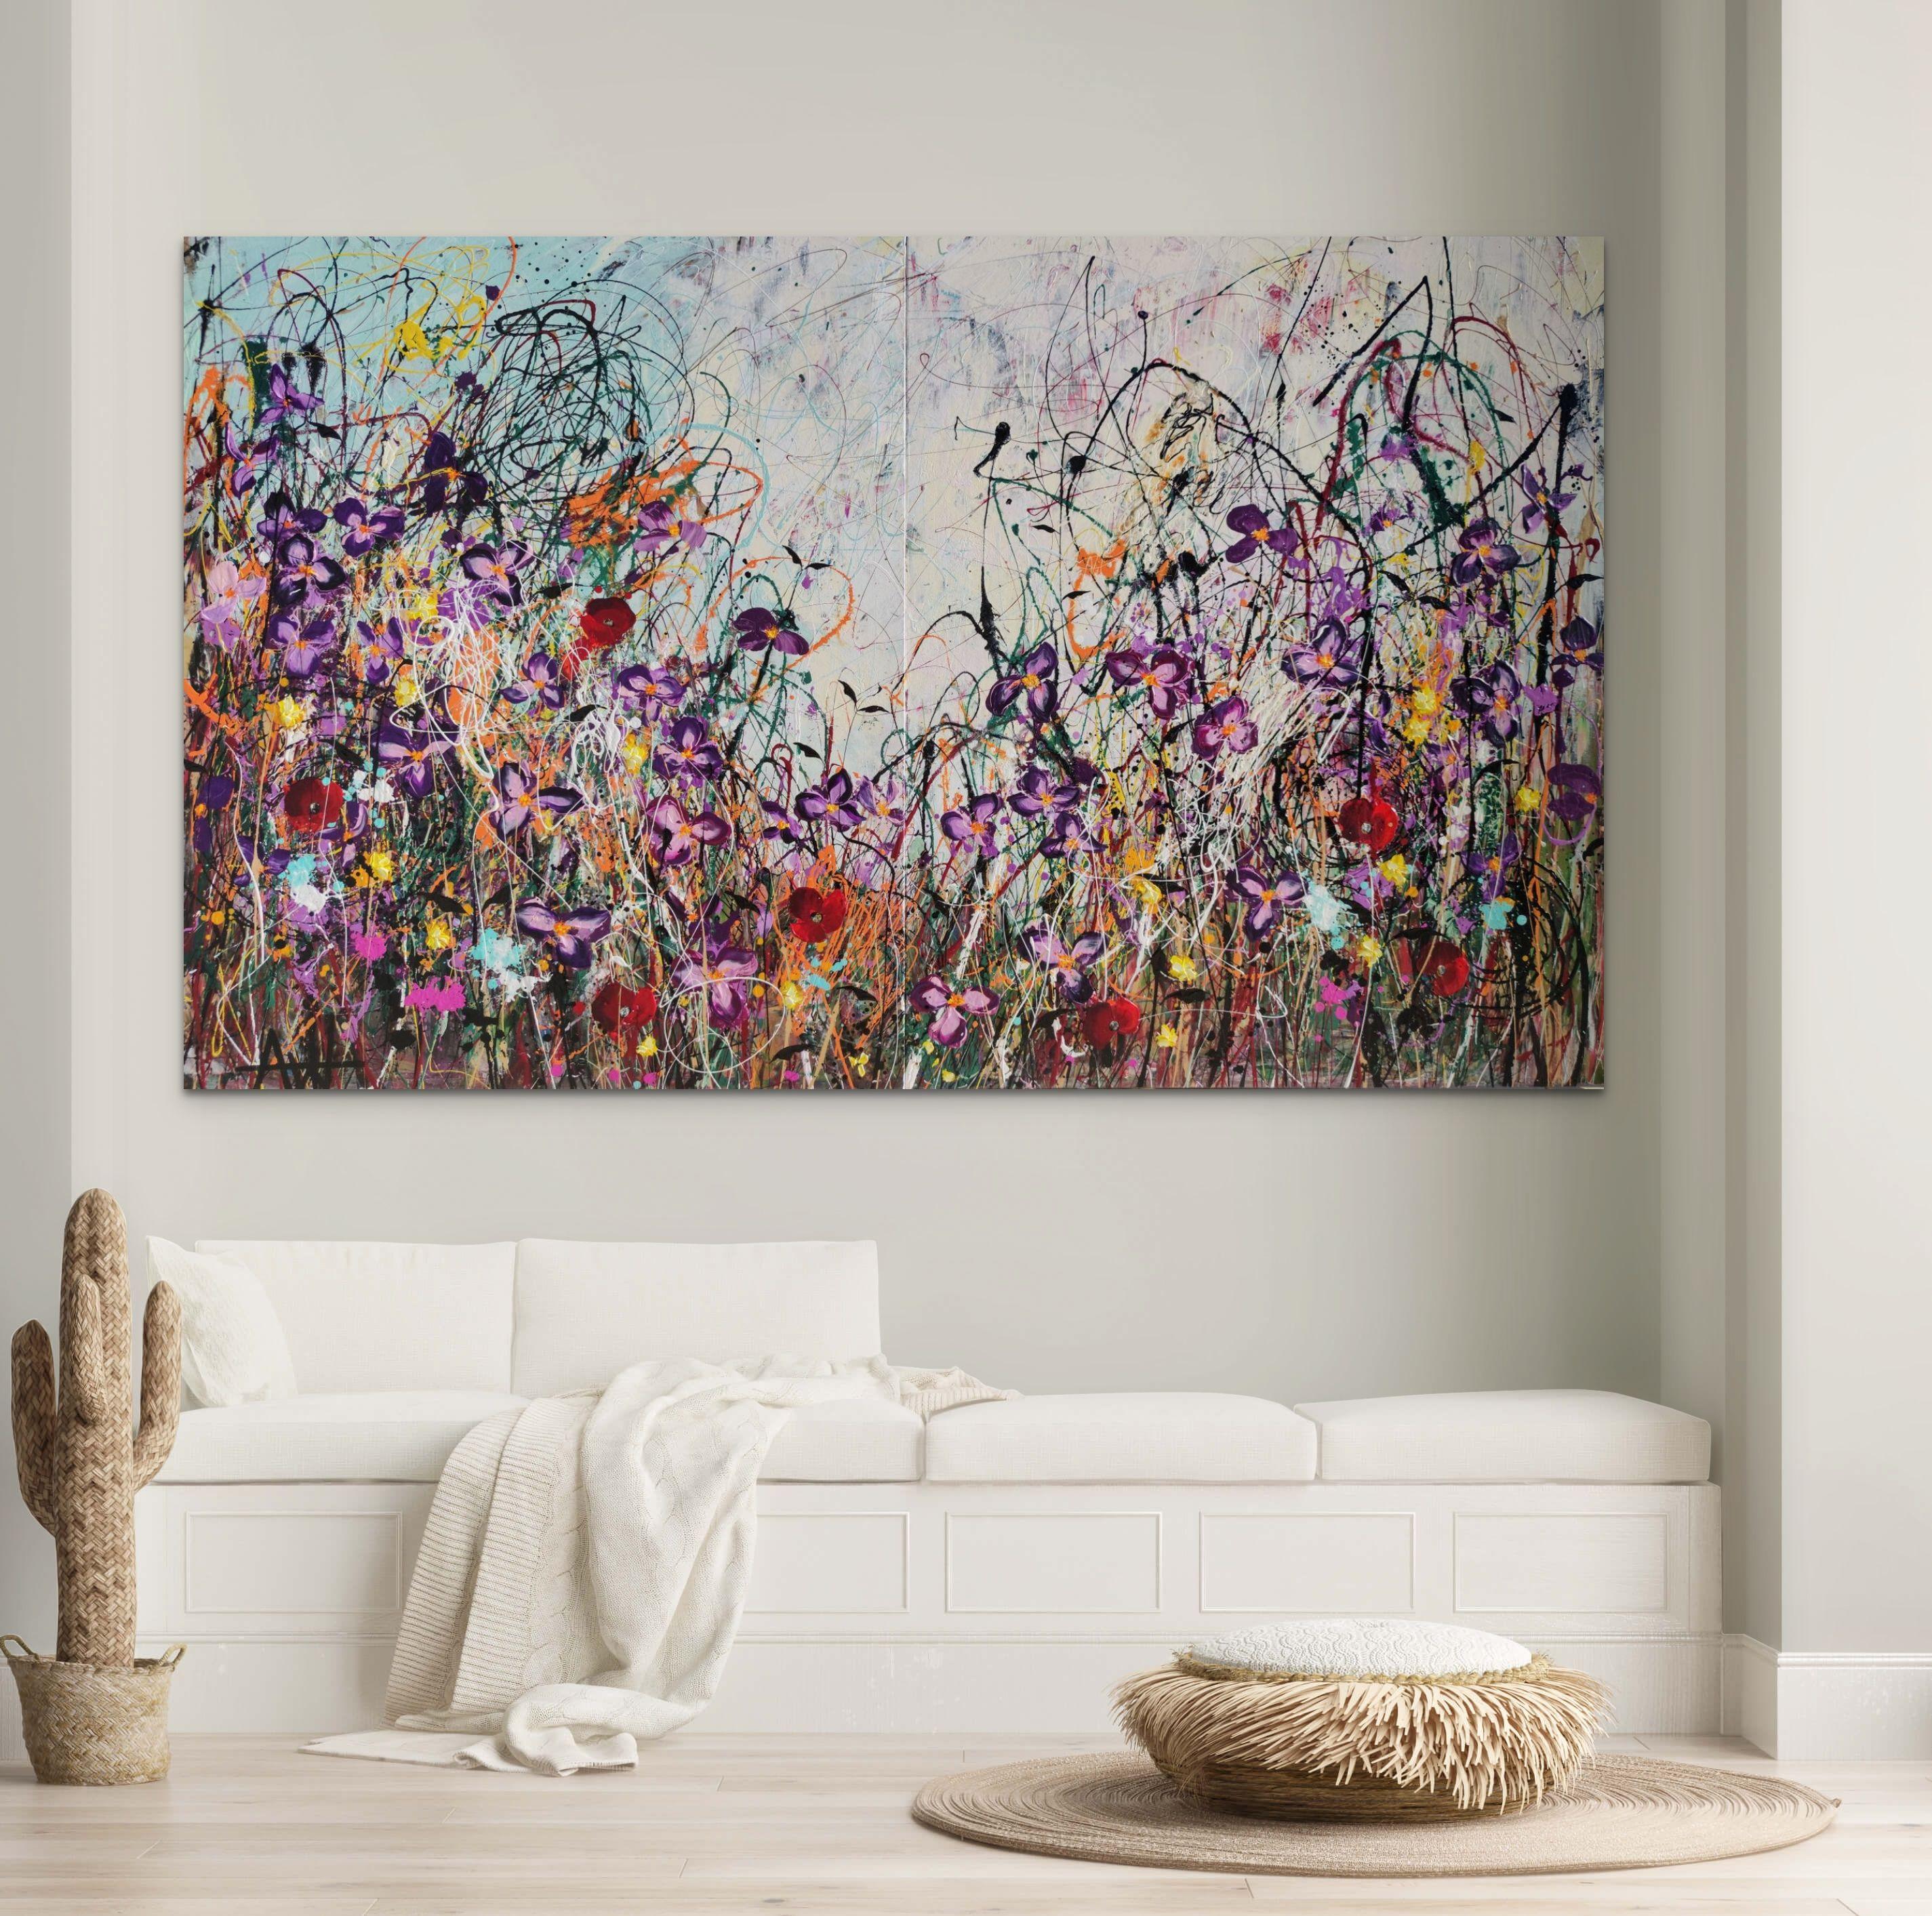 Where The Wild Flowers Bloom, acrylic and oil on canvas, 200 x 120 x 2 cm on two canvas panels each measuring 100 x 120 x 2 cm (Diptych).   The air is damp and fresh. Light beckons and sun rays break the horizon. Violet blues flowers dance in a